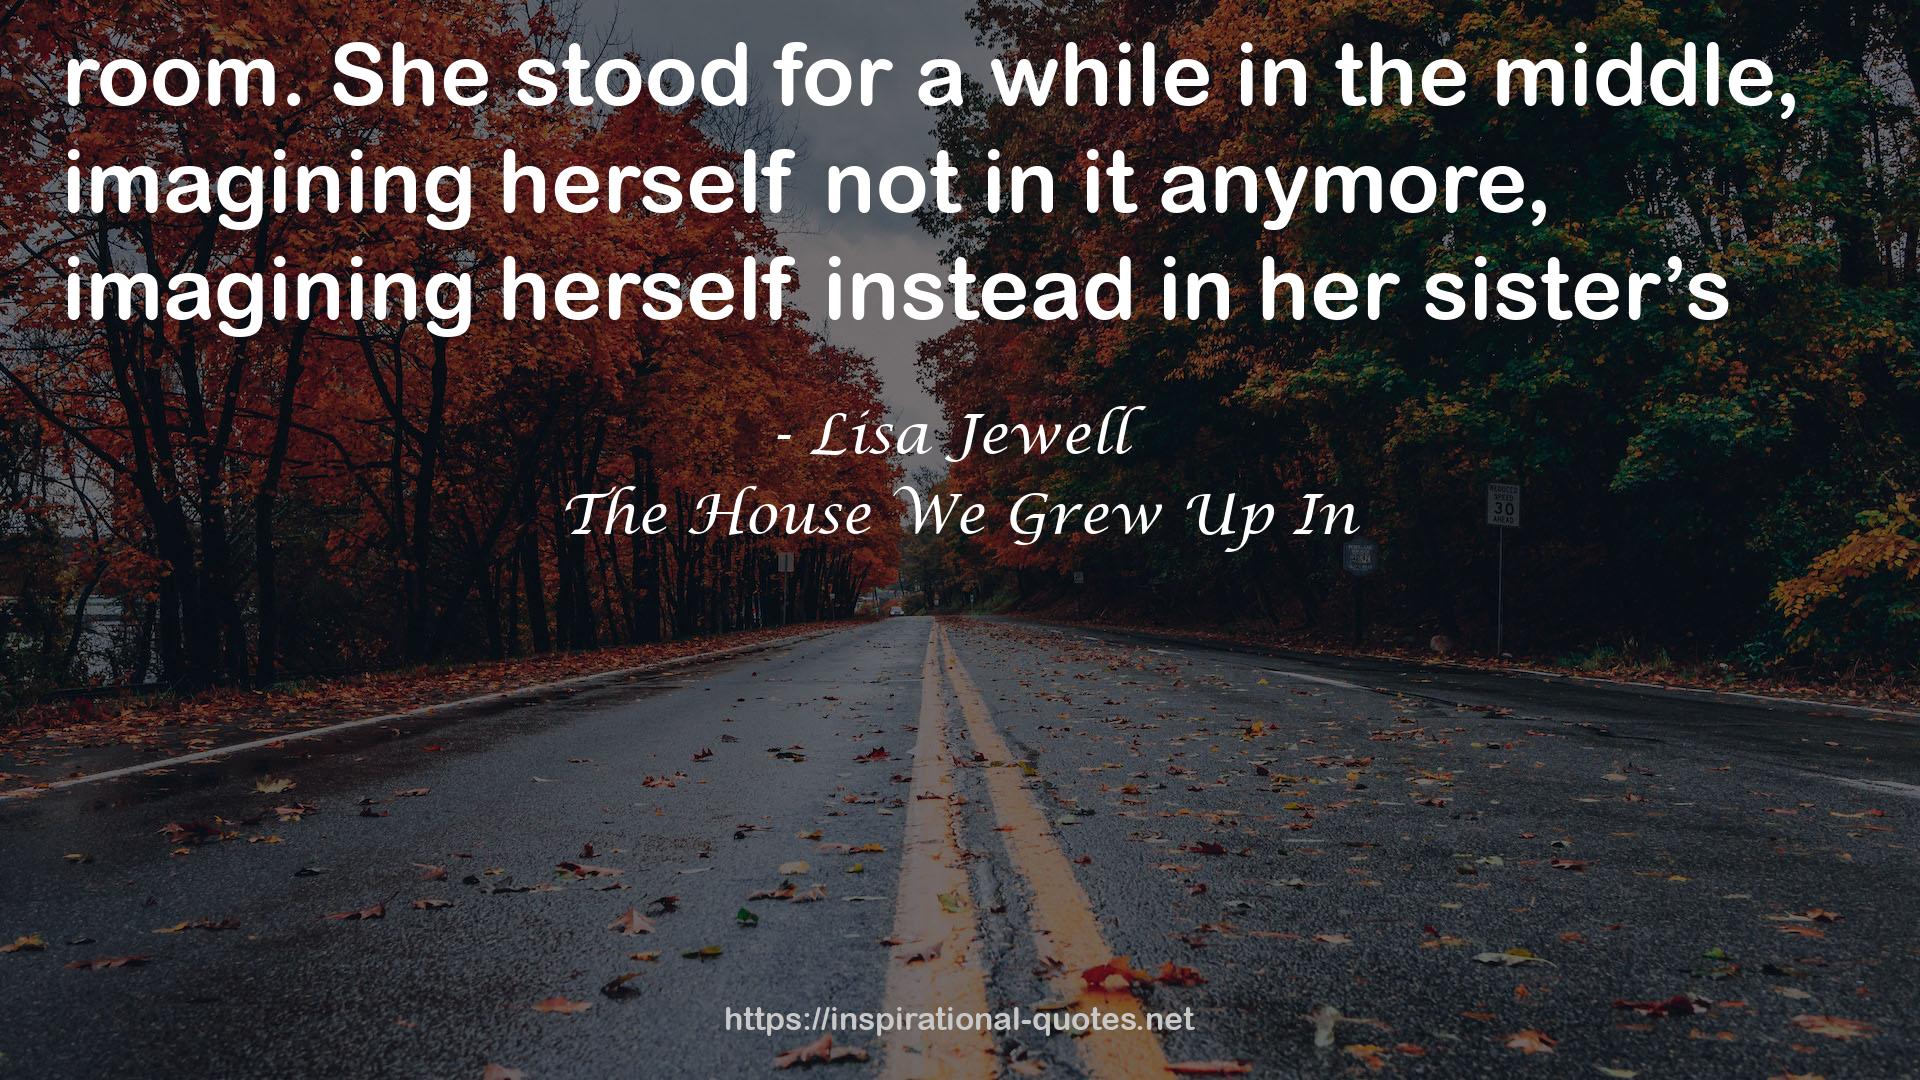 Lisa Jewell QUOTES